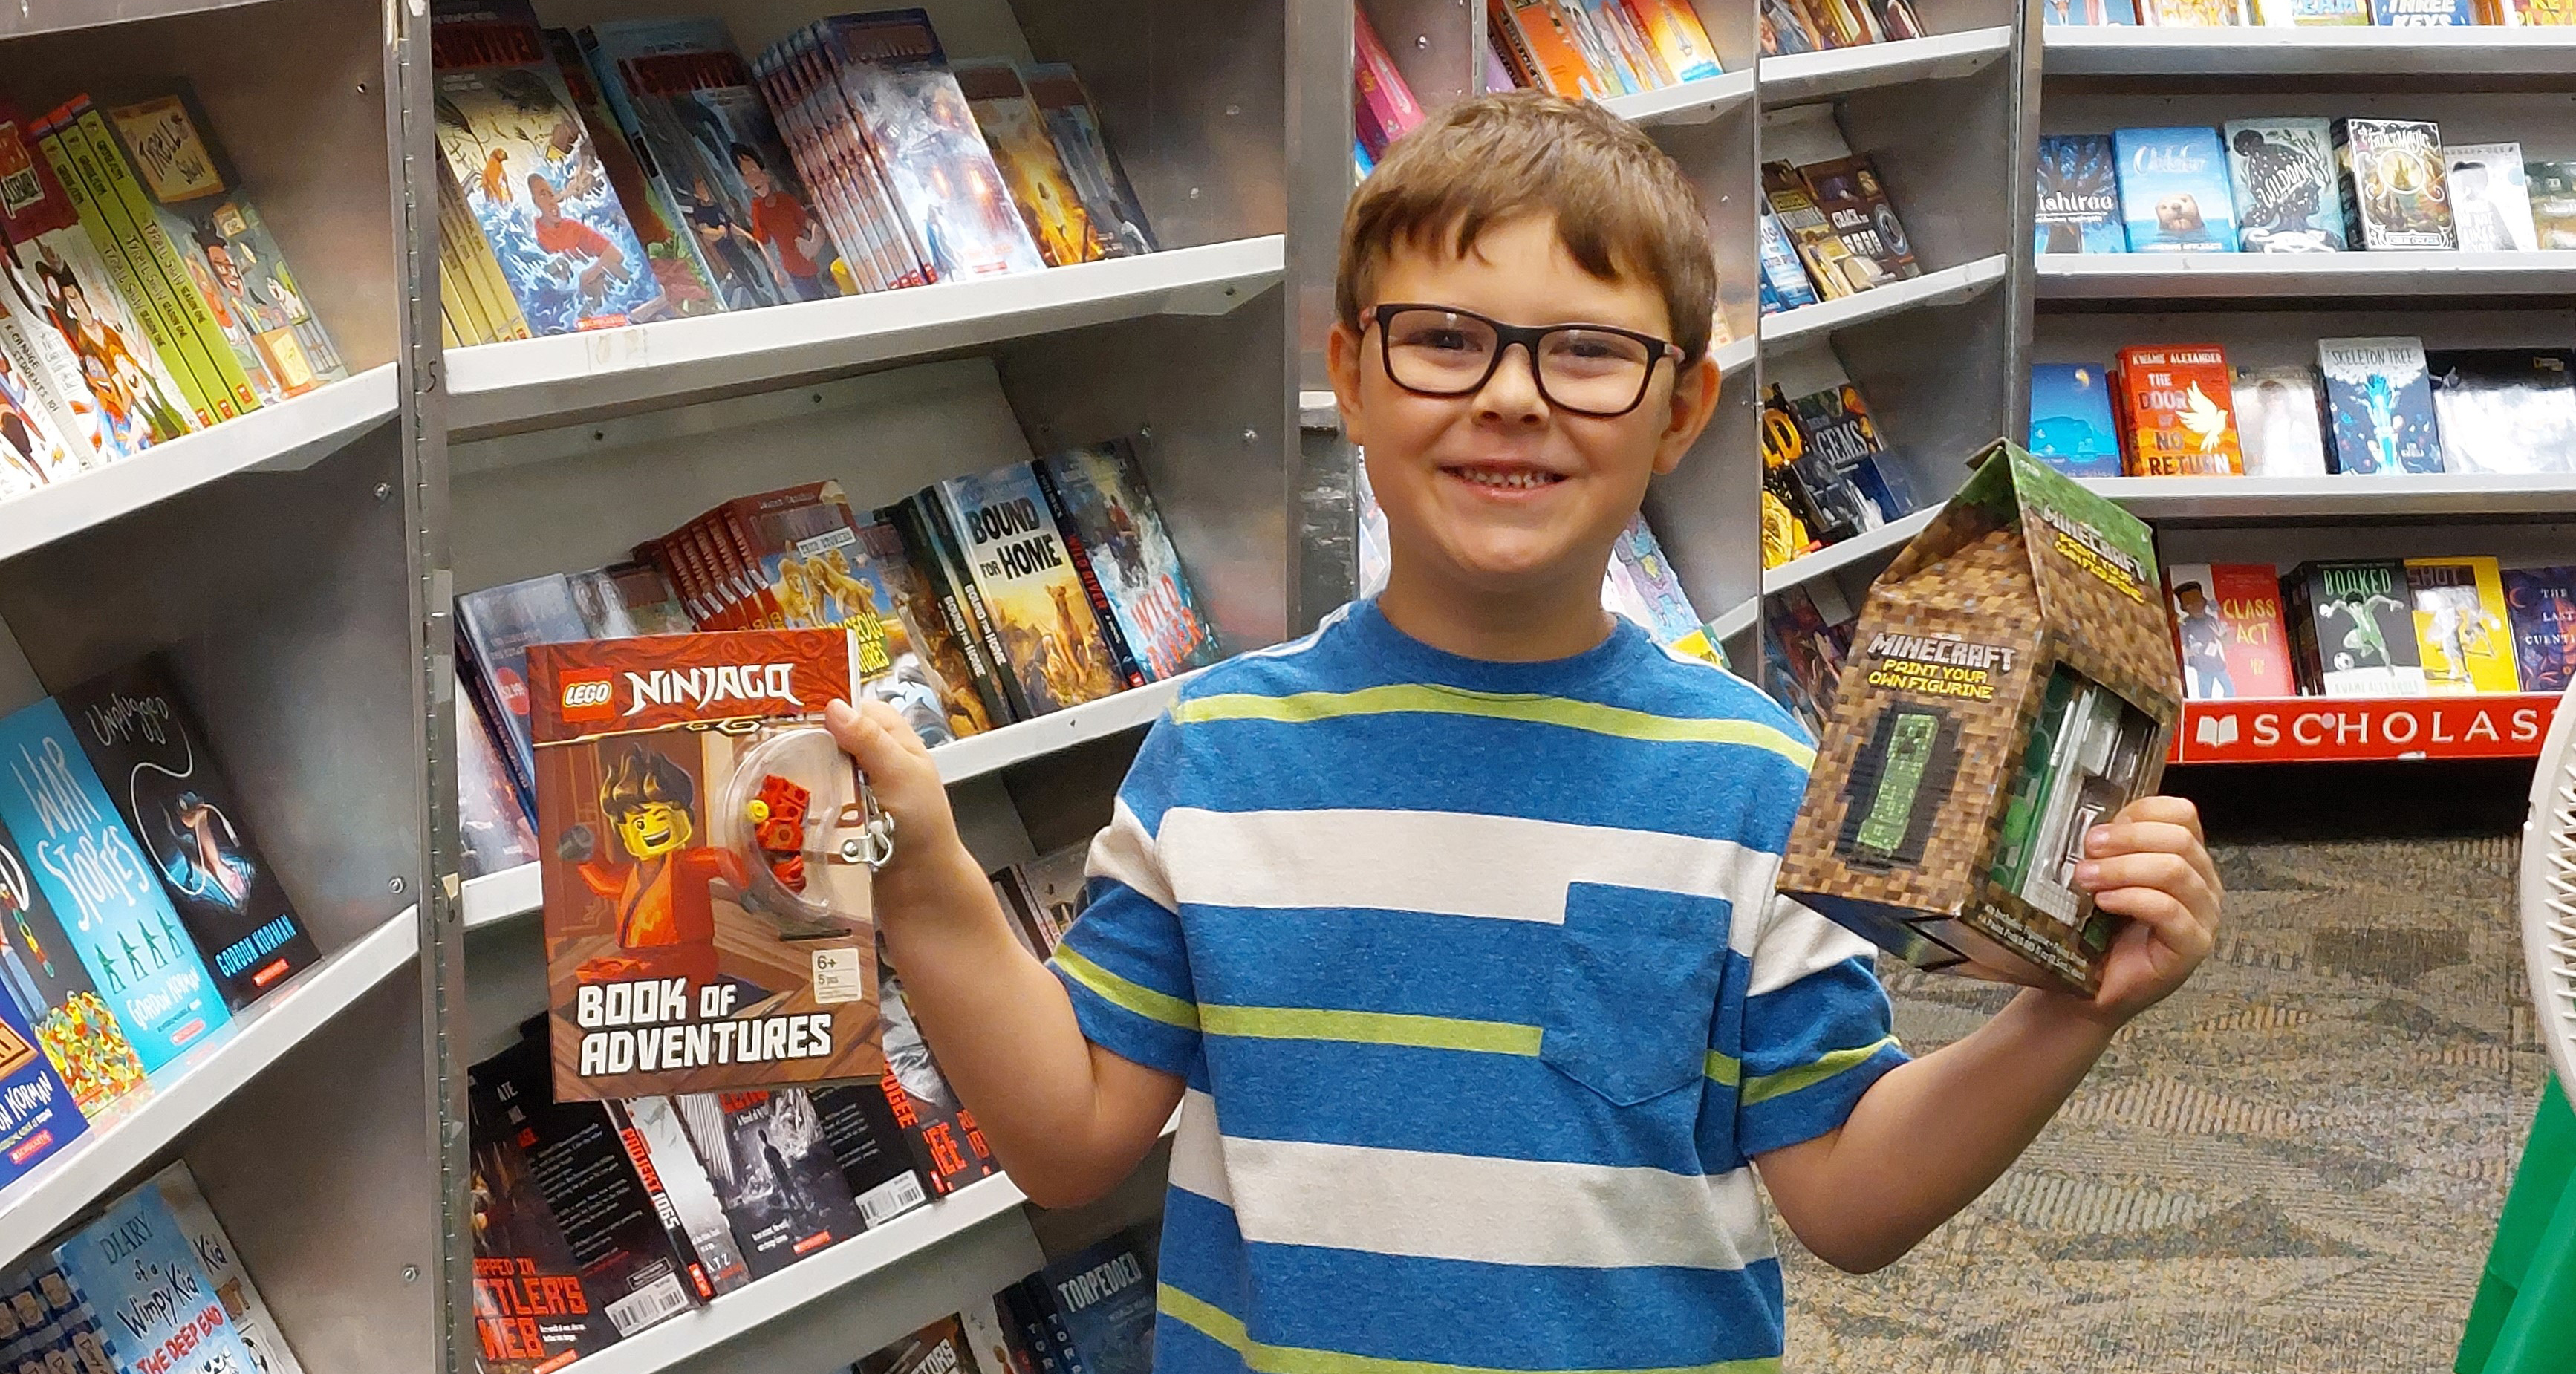 A boy holding up two book in the school library